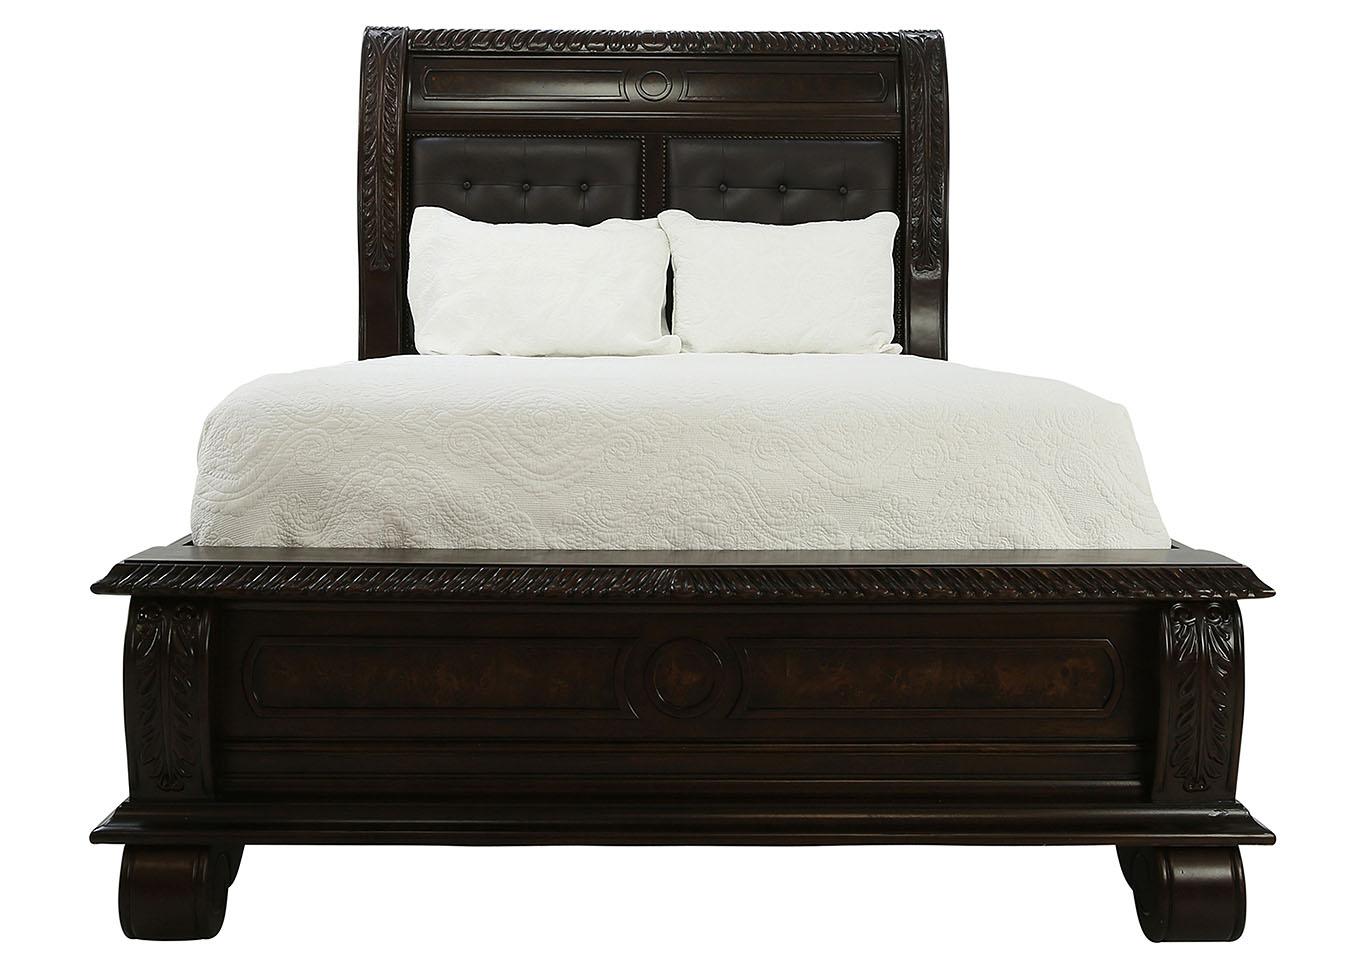 HILLSBORO KING BED,HOME INSIGHTS